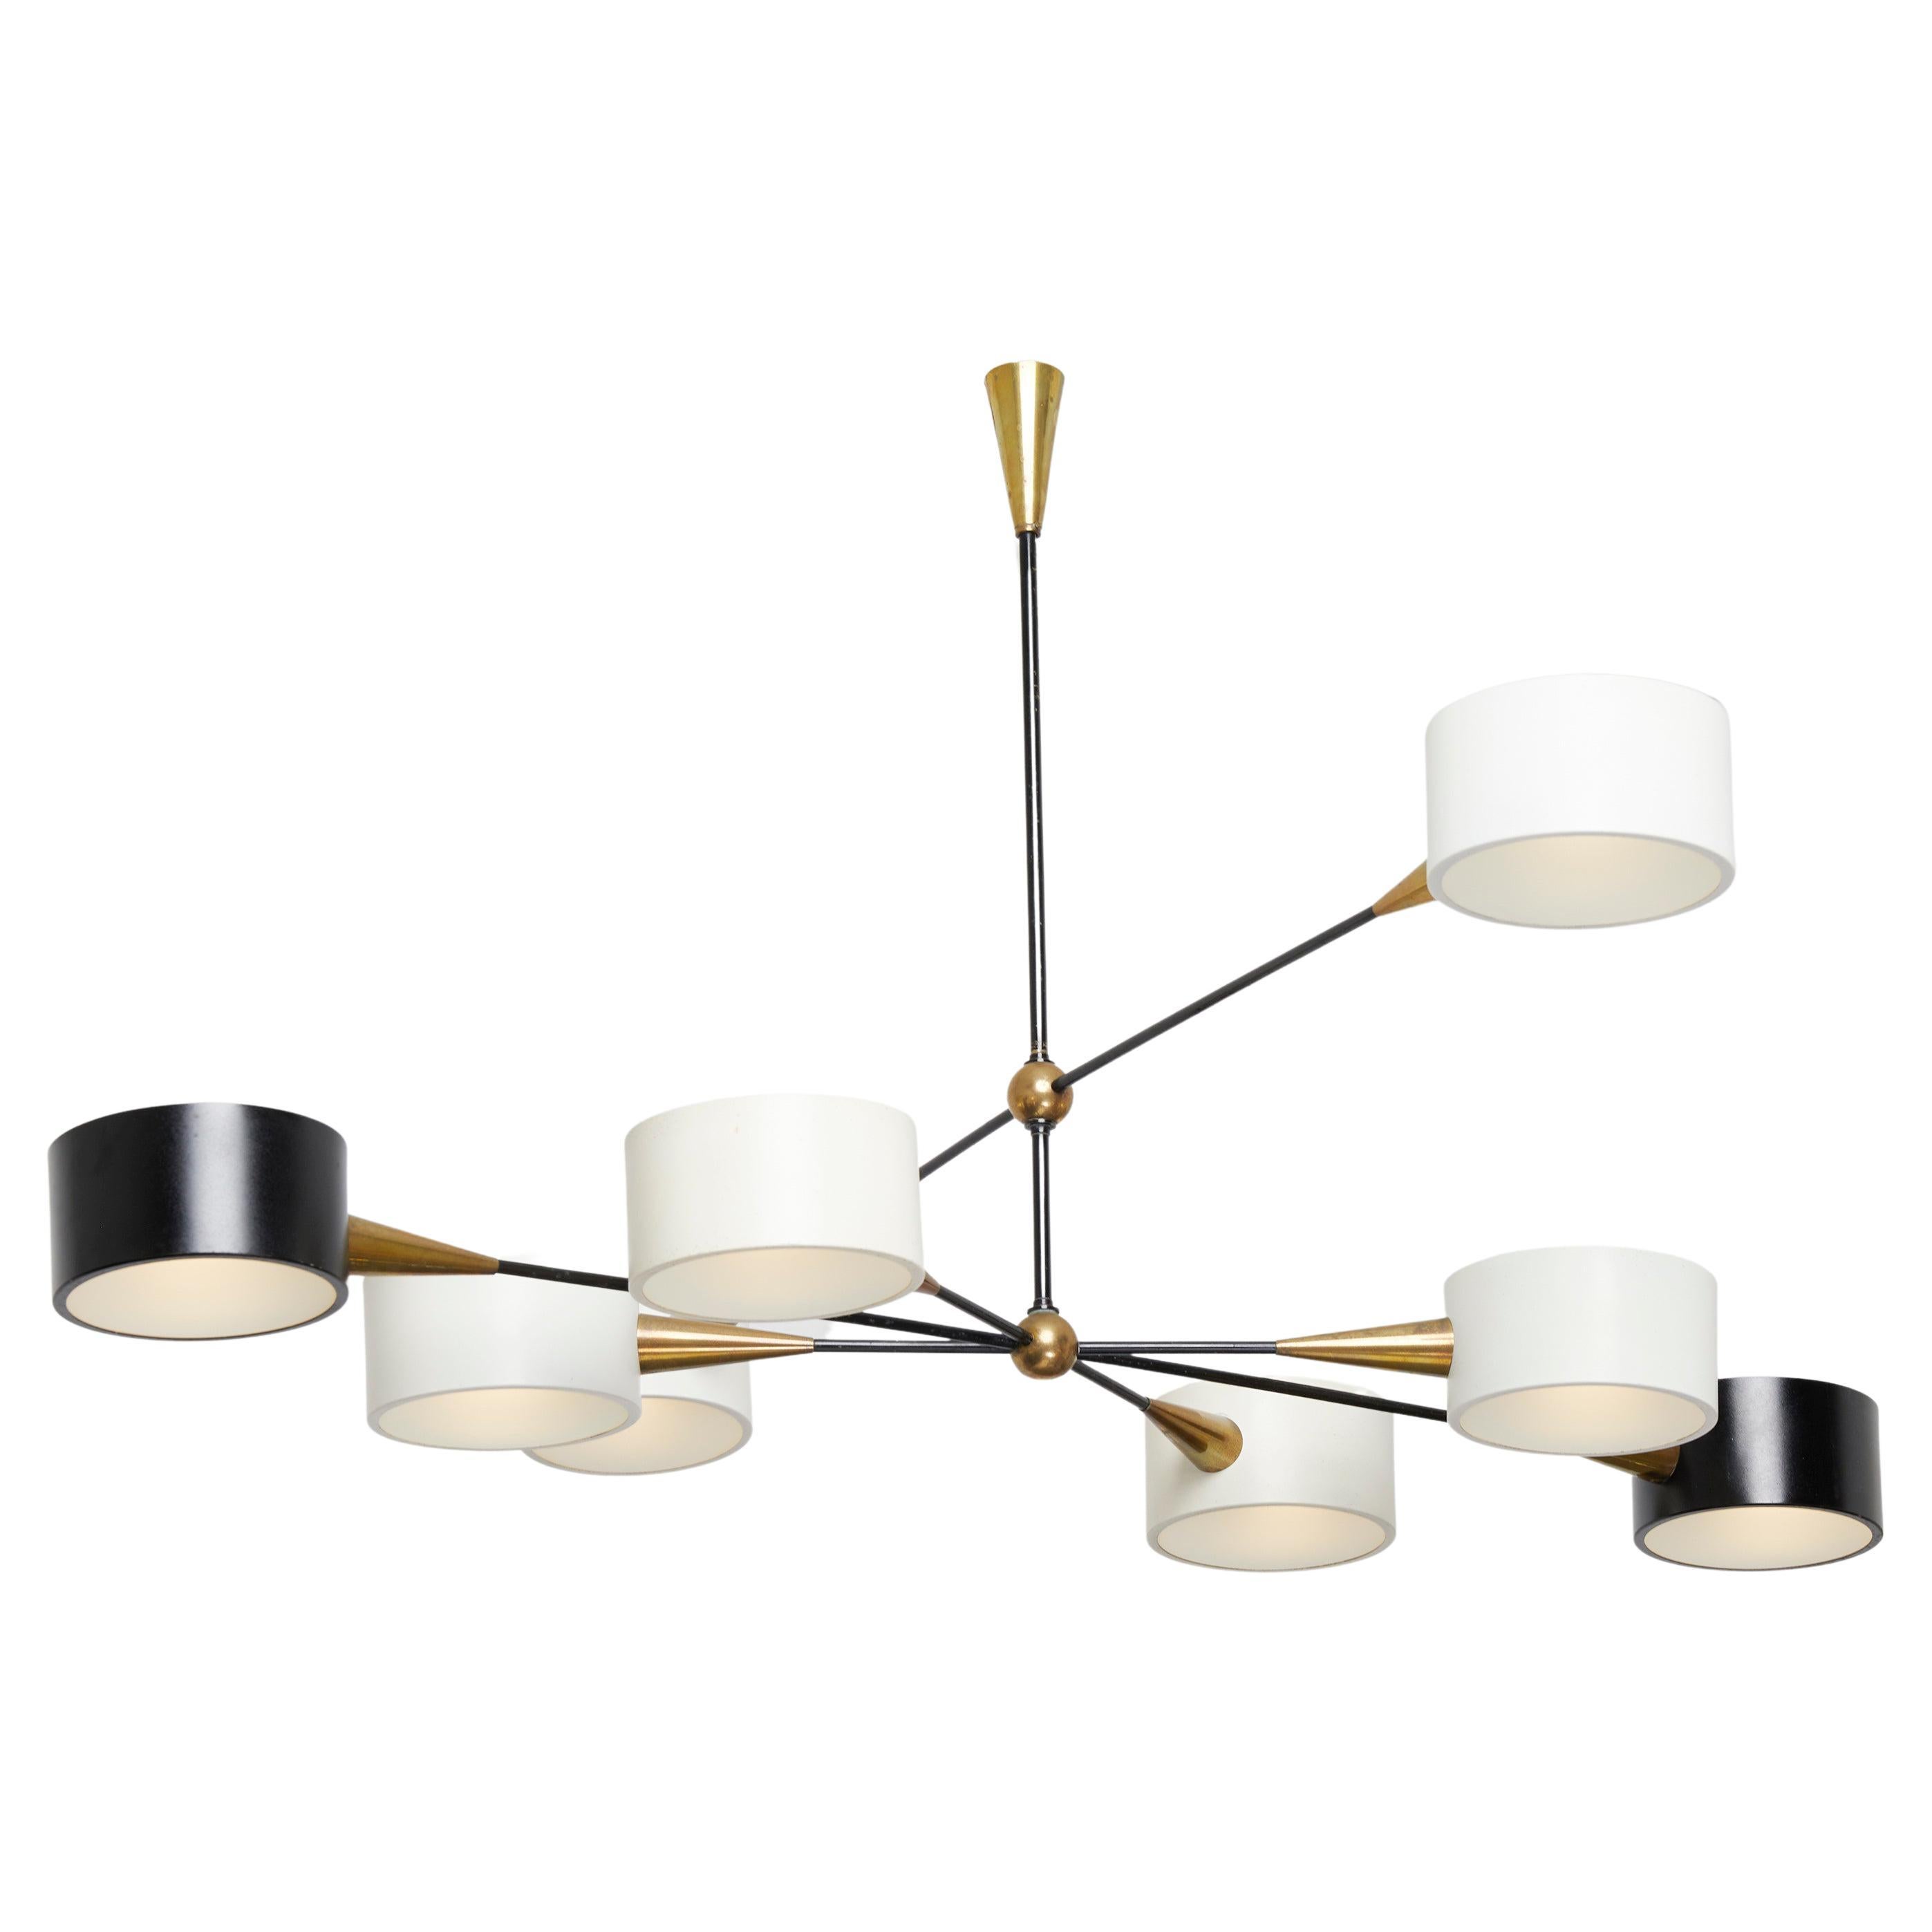 Large Brass and Frosted Glass Chandelier by Editions Lunel, France 1950-60